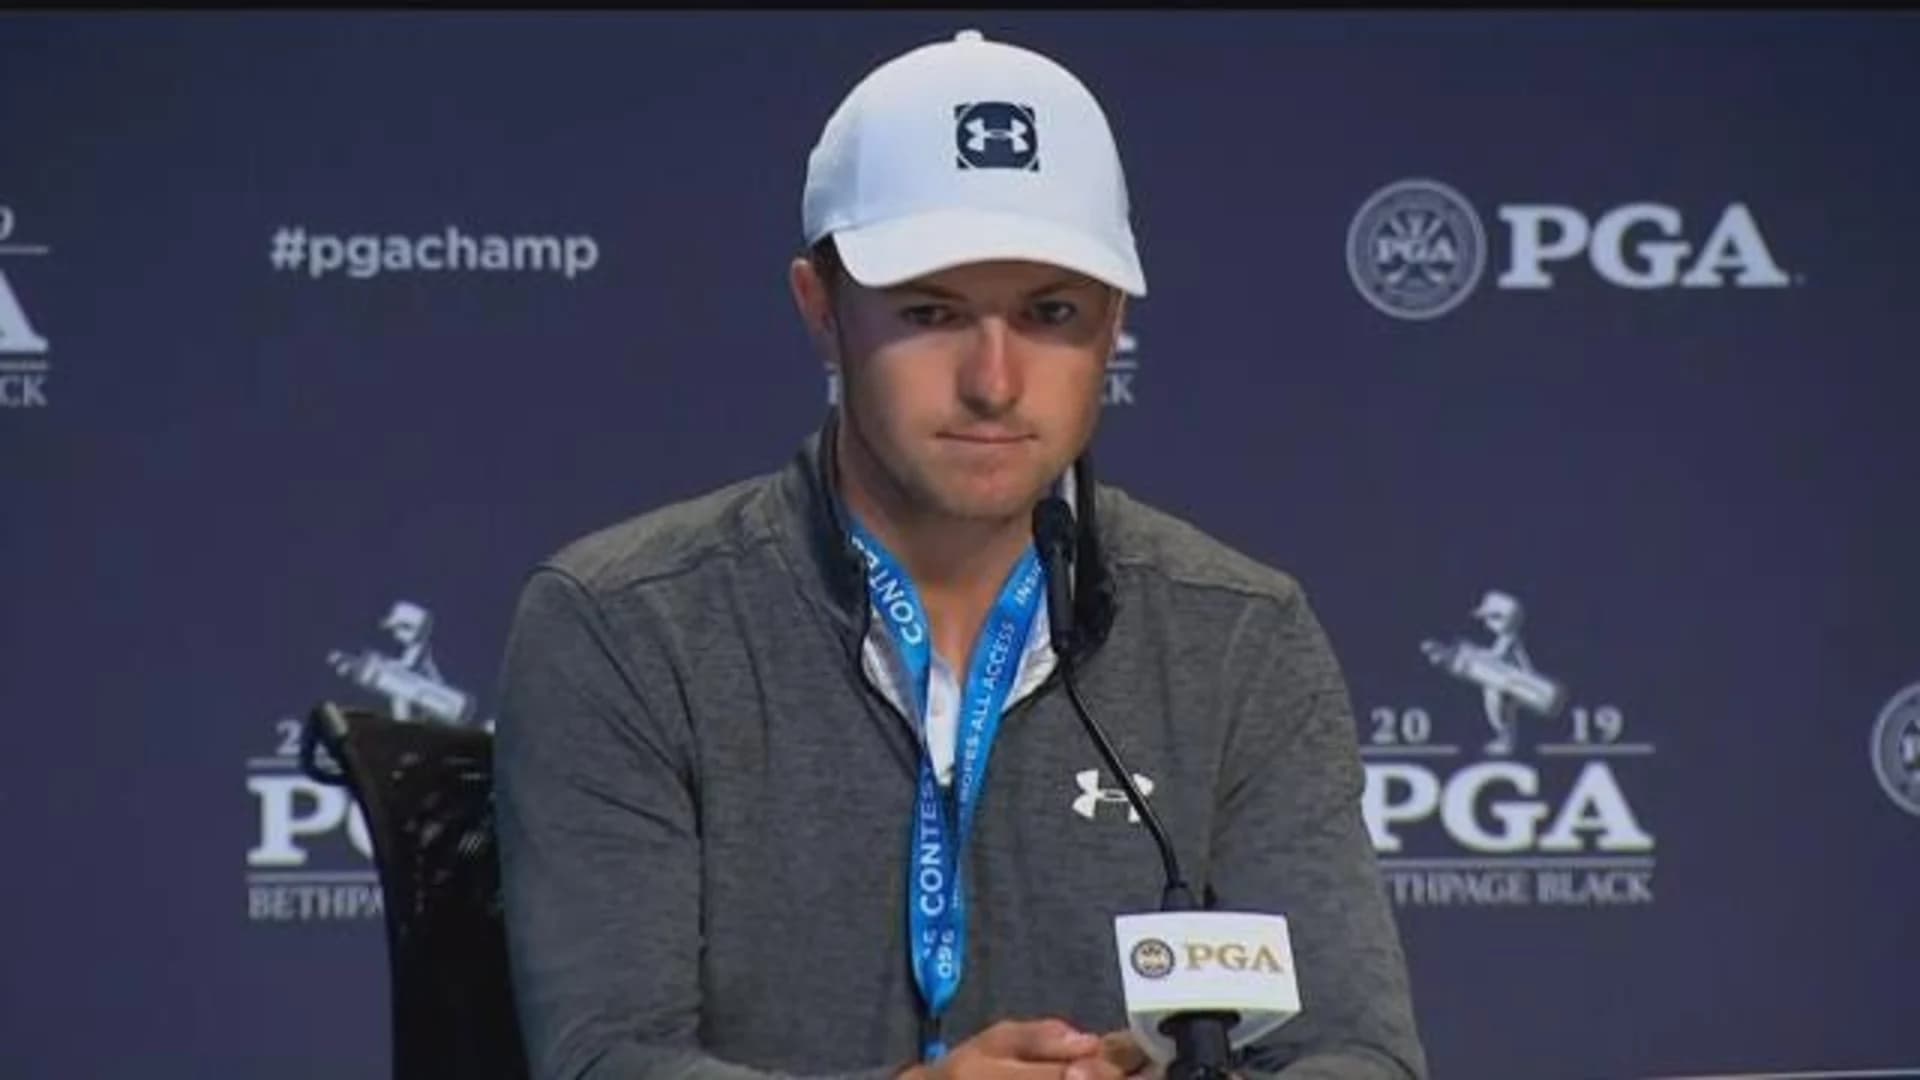 Extended news conference with Jordan Spieth during PGA Championship week